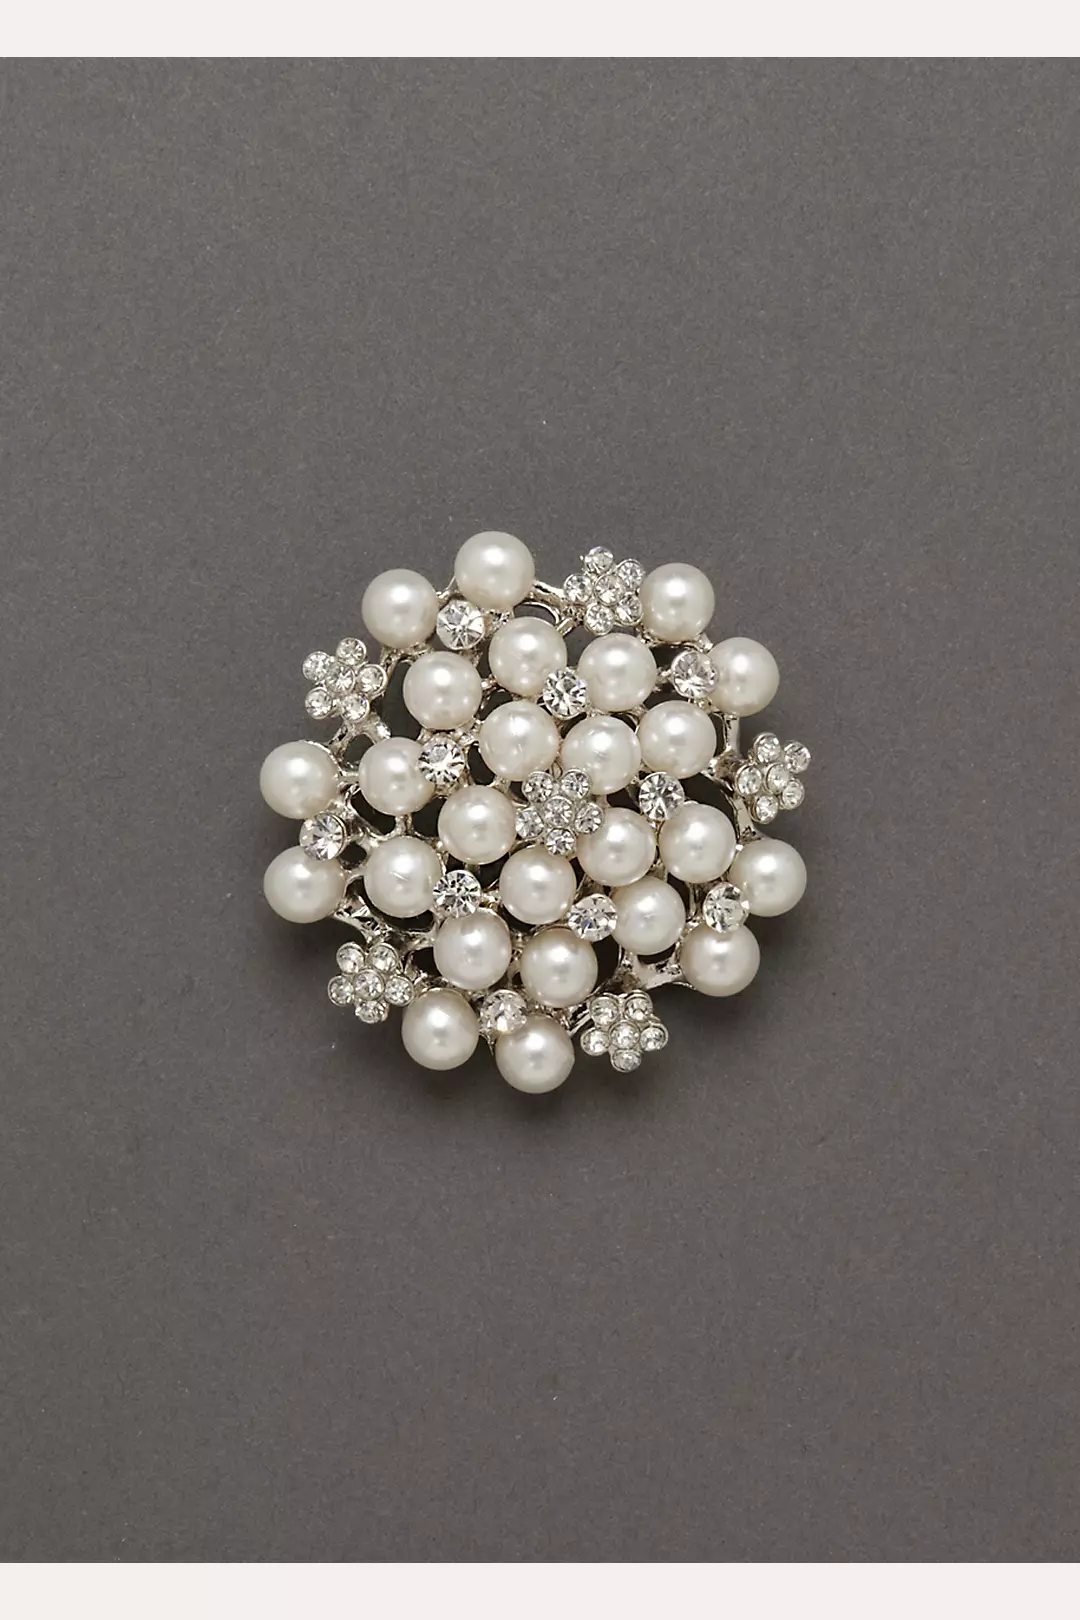 Crystal Flower and Pearl Pin Image